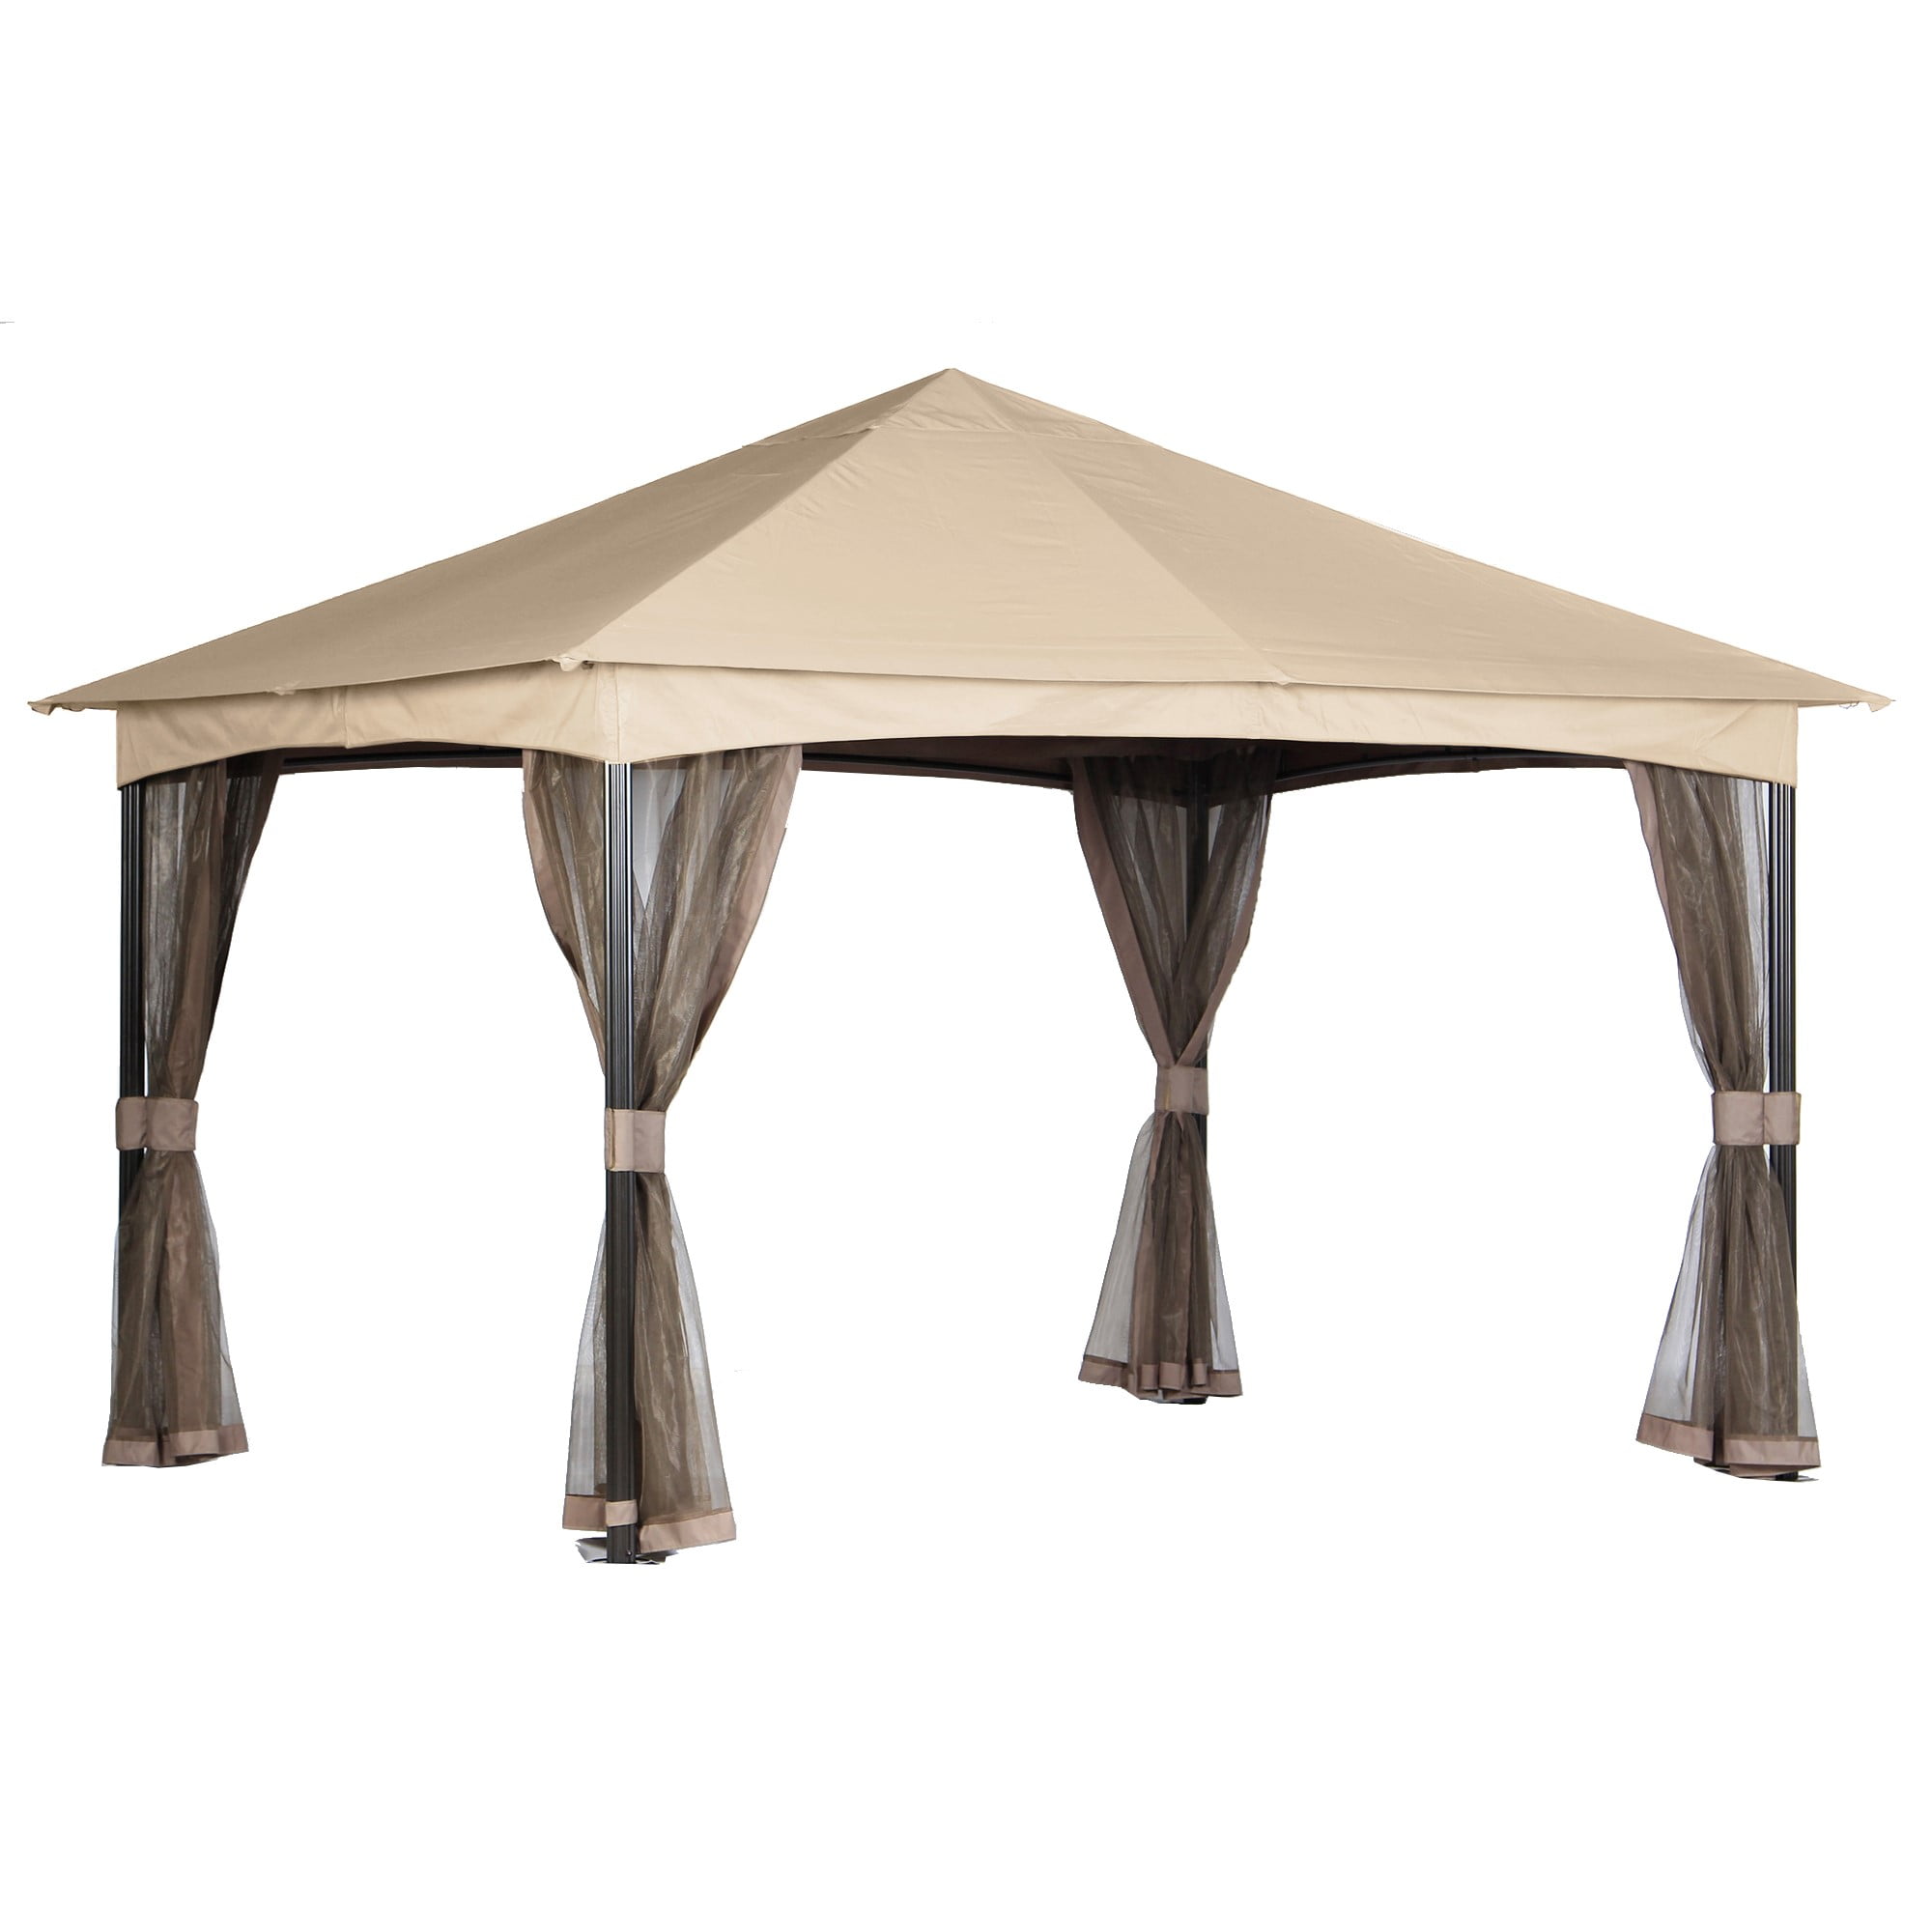 Garden Winds Replacement Canopy Top Cover For The Colfax Gazebo